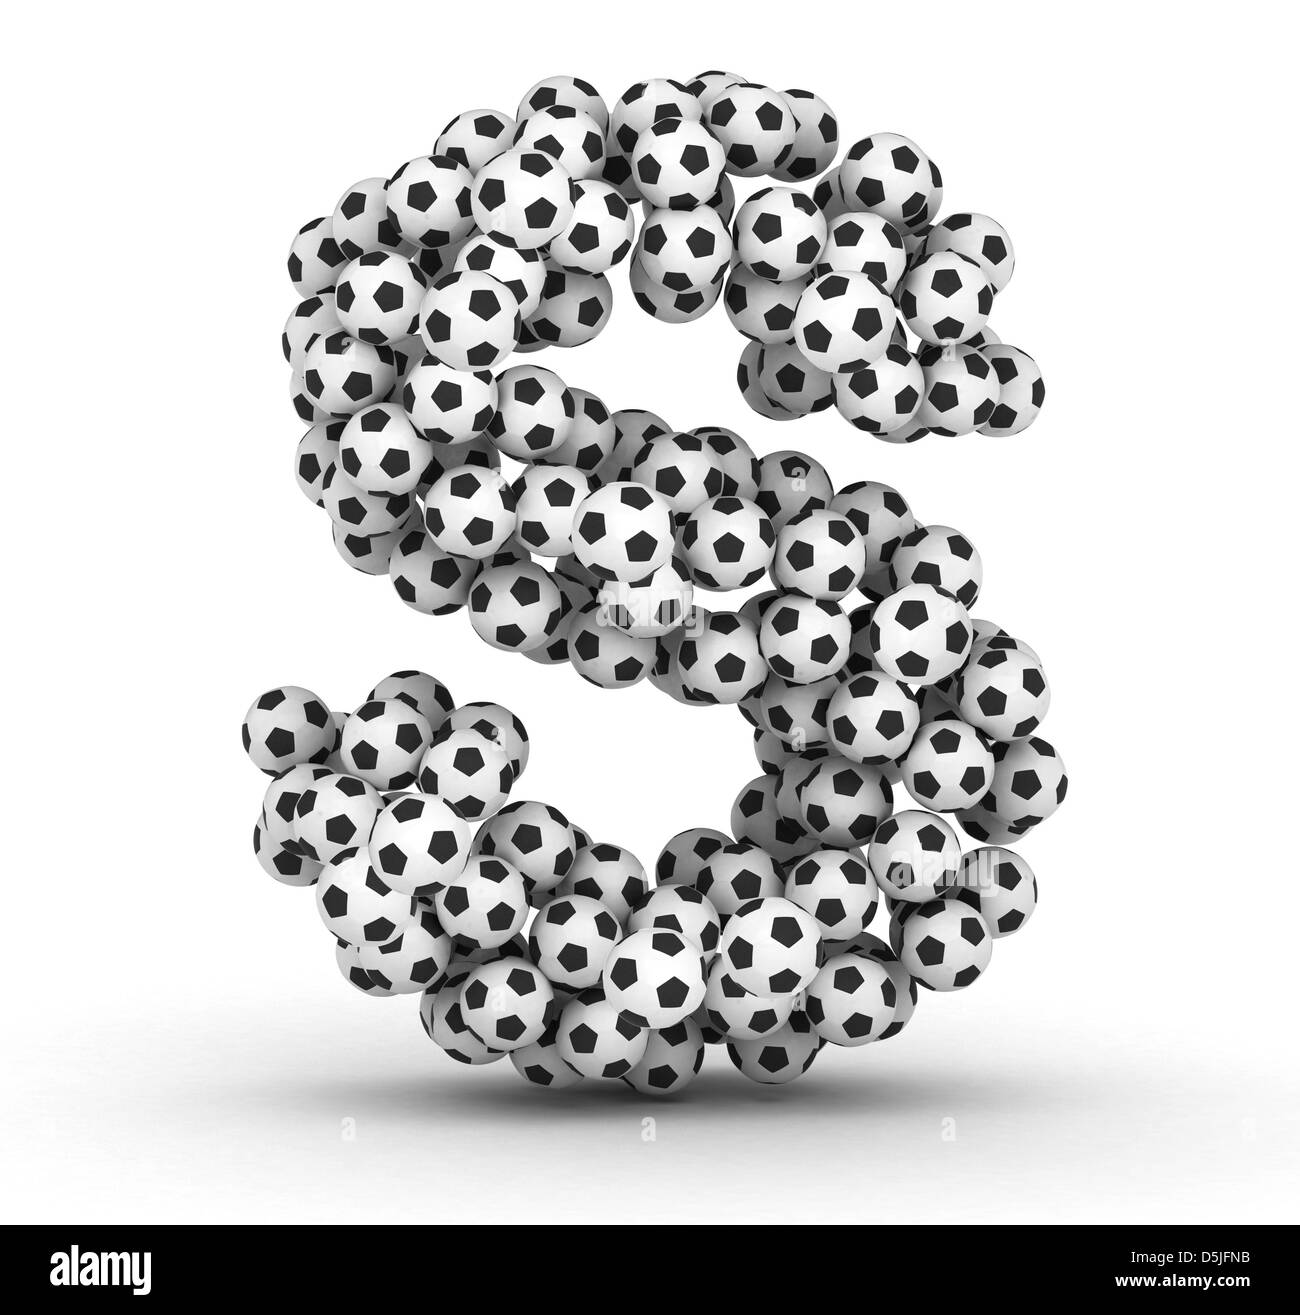 Letter S from soccer football balls isolated on white background Stock Photo